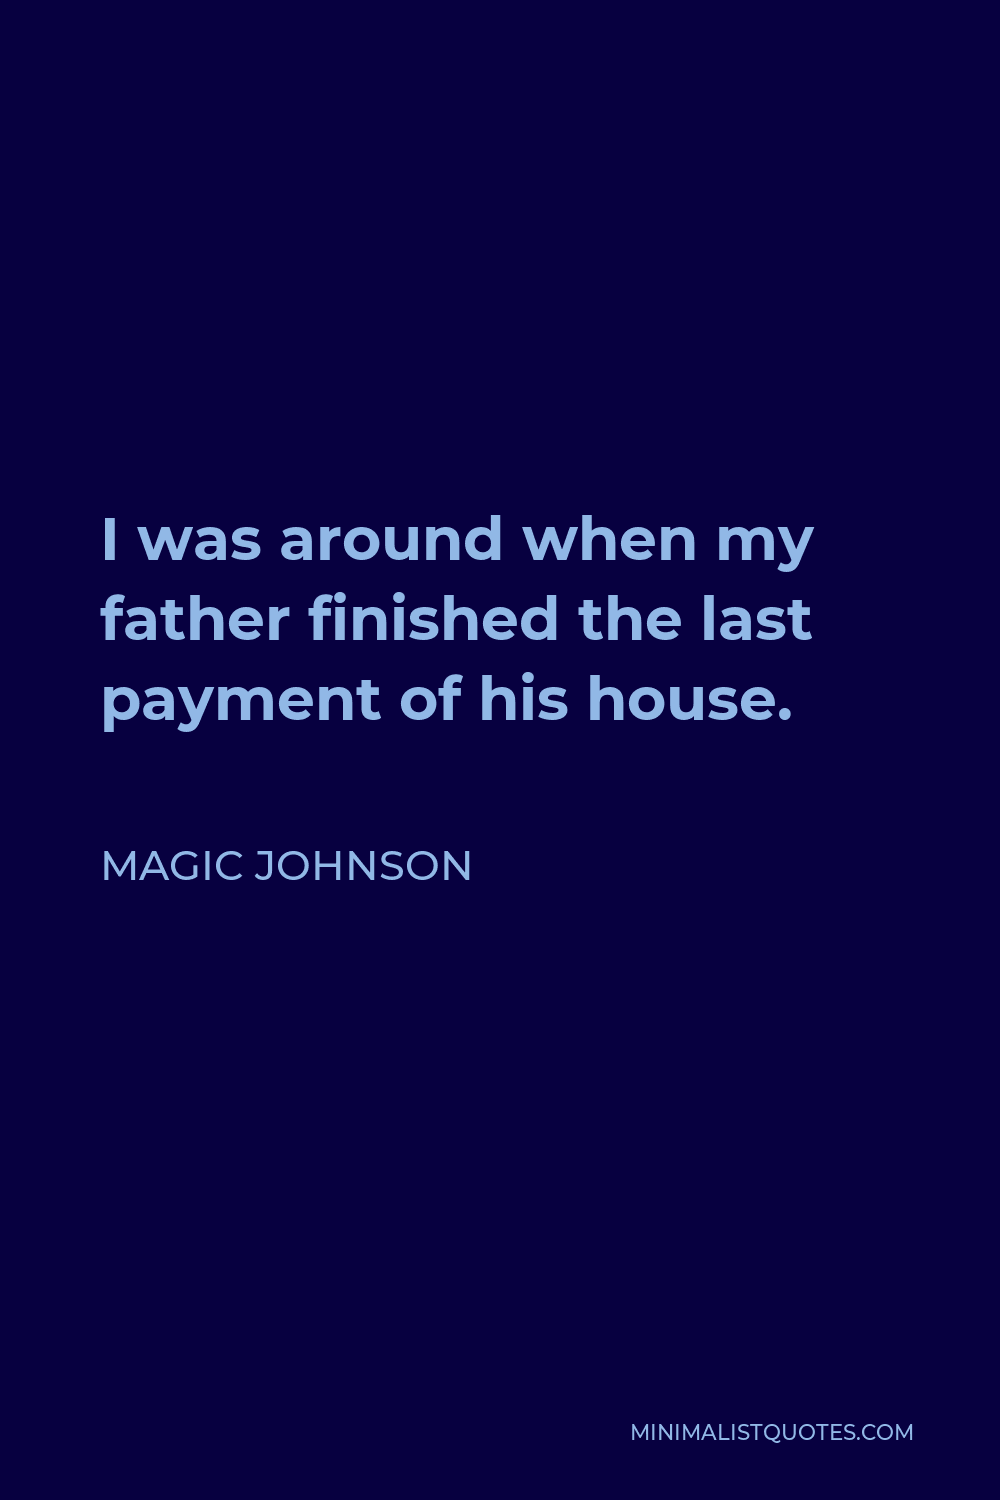 Magic Johnson Quote - I was around when my father finished the last payment of his house.